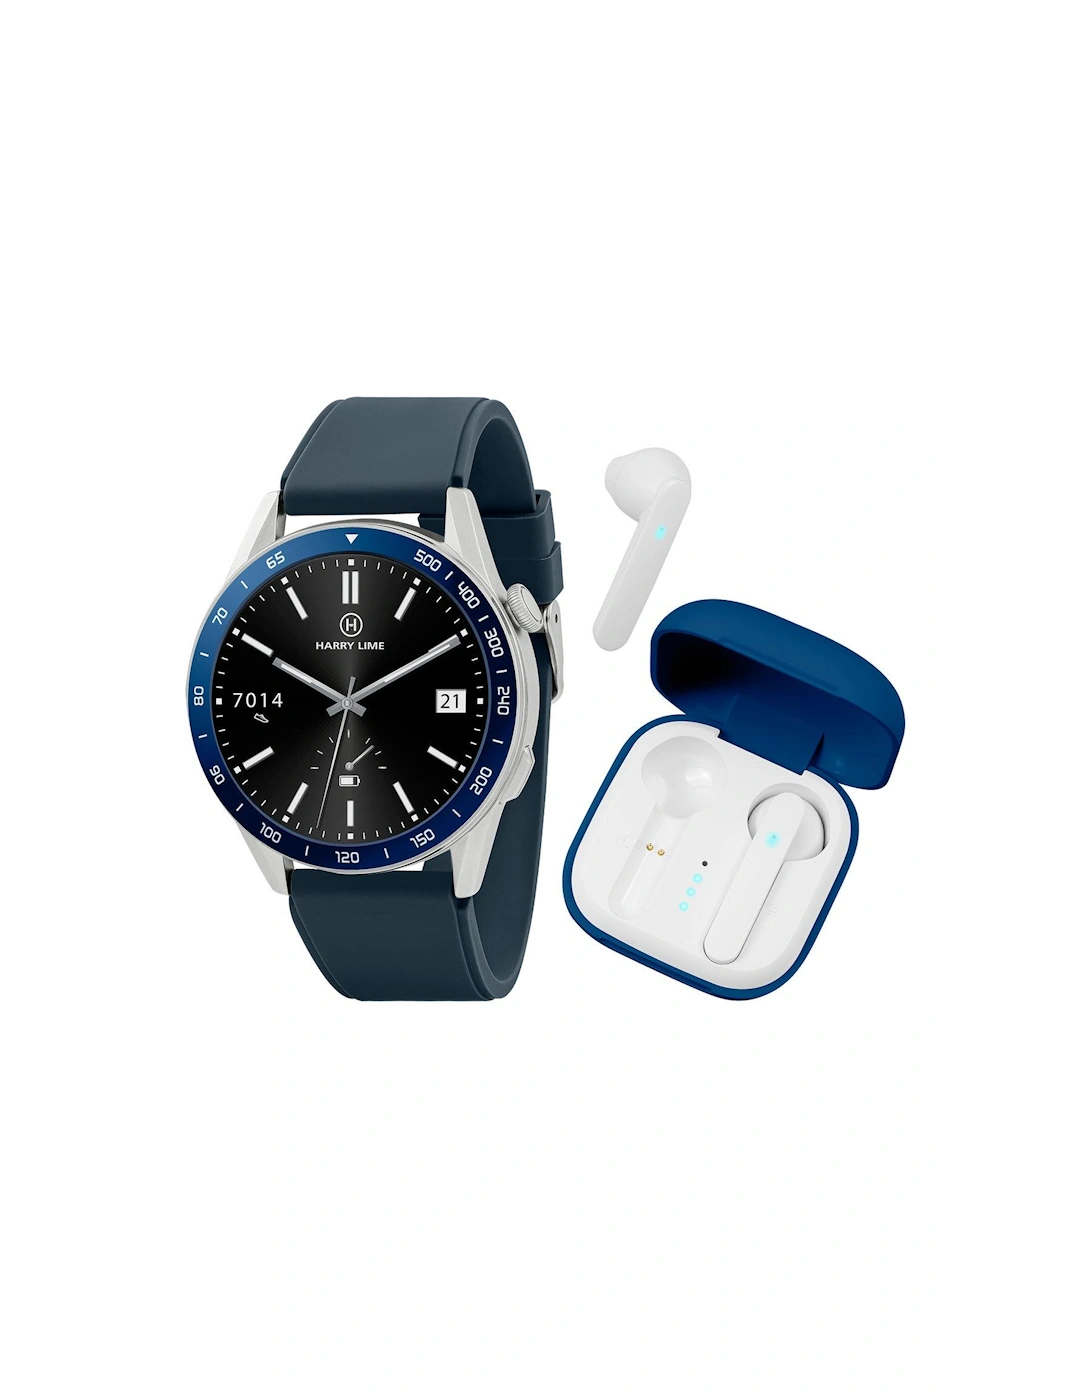 Series 27 Navy Silicone Strap Smart Watch With Blue True Wireless Earphone In Charging Case, 2 of 1